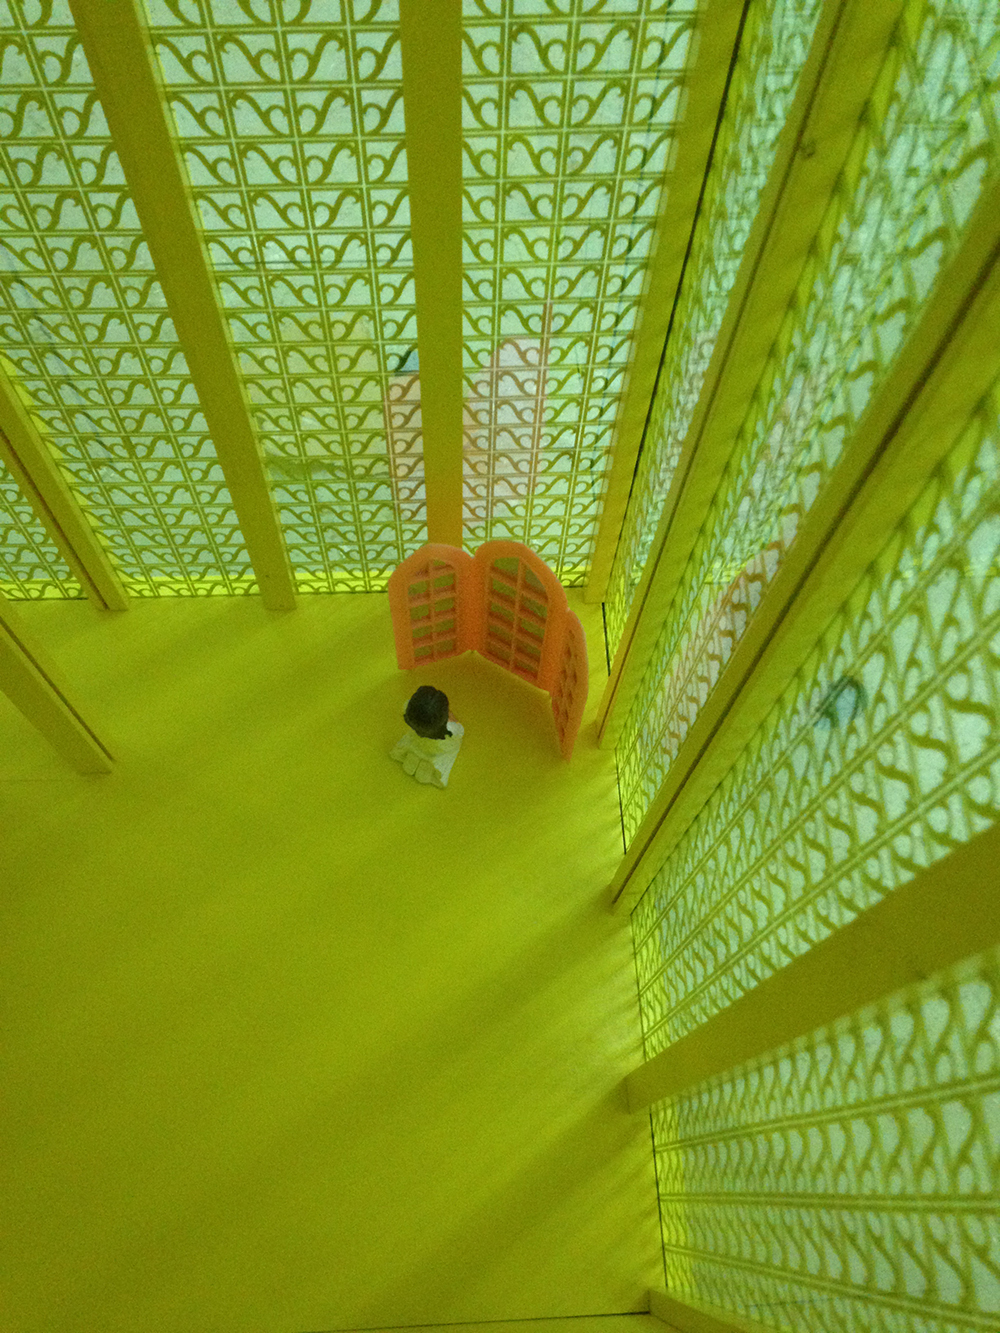 interior view of a yellow skyscraper with a small figure